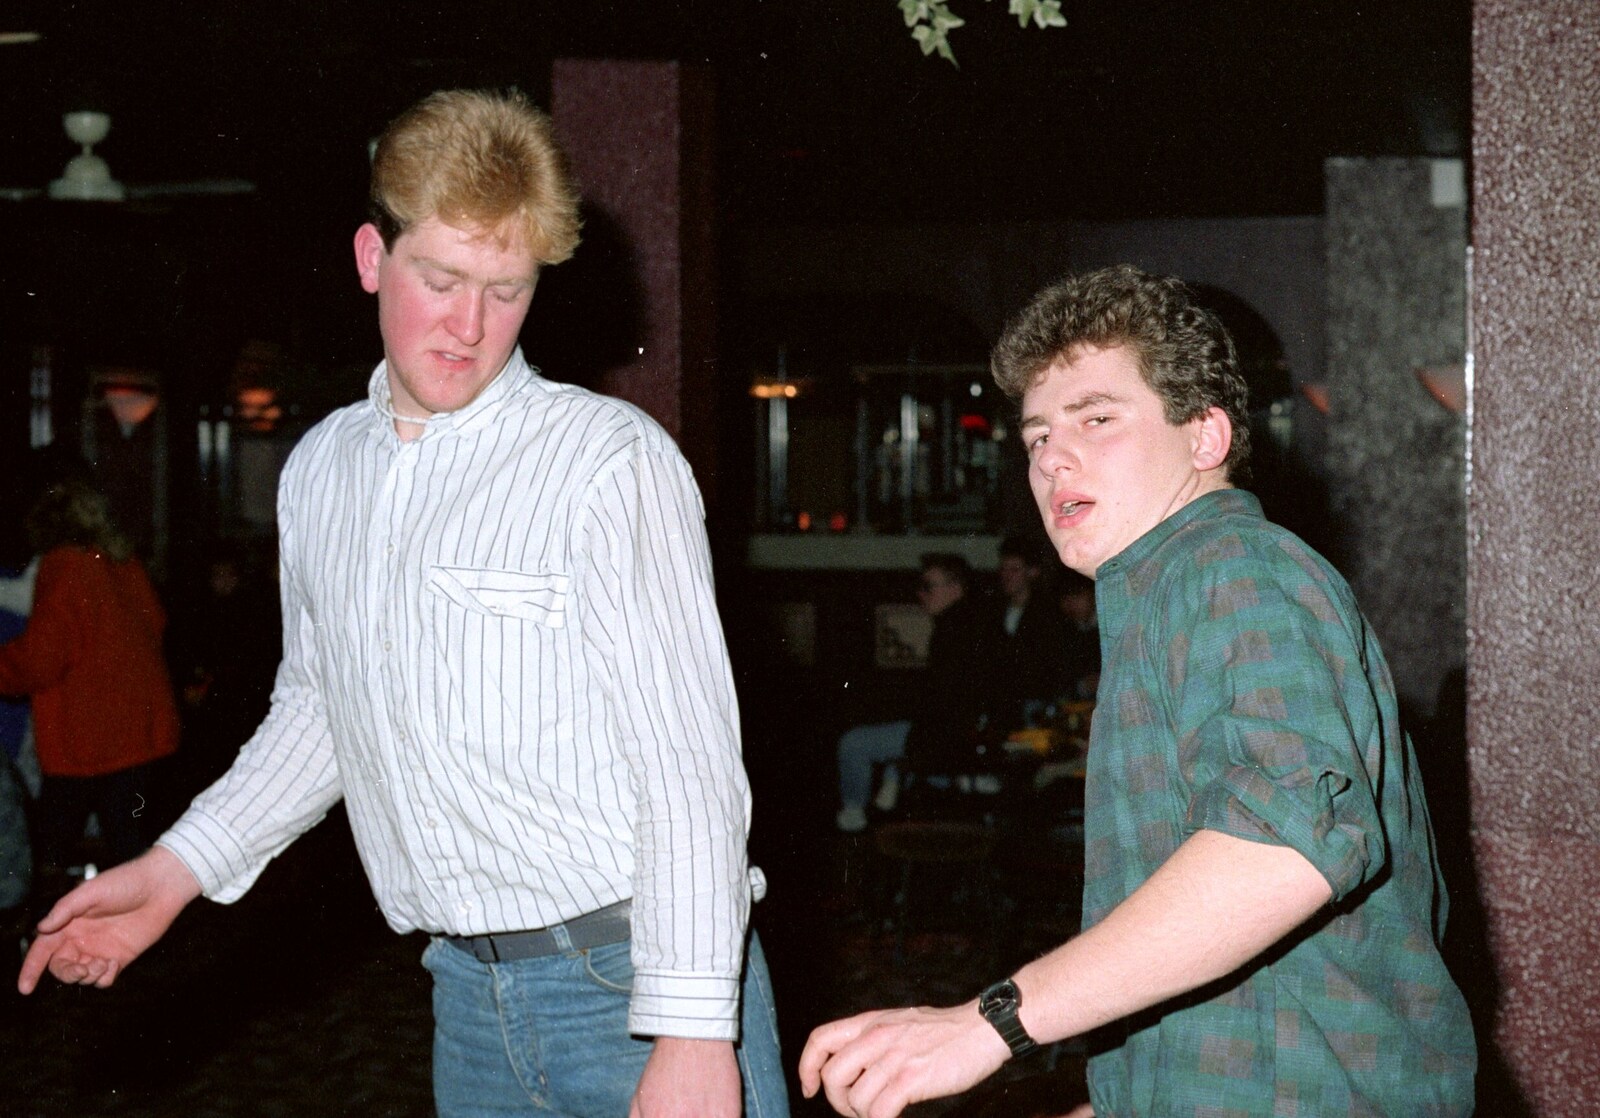 Caught mid-dance from Uni: A Party in Snobs Nightclub, Mayflower Street, Plymouth - 18th October 1986